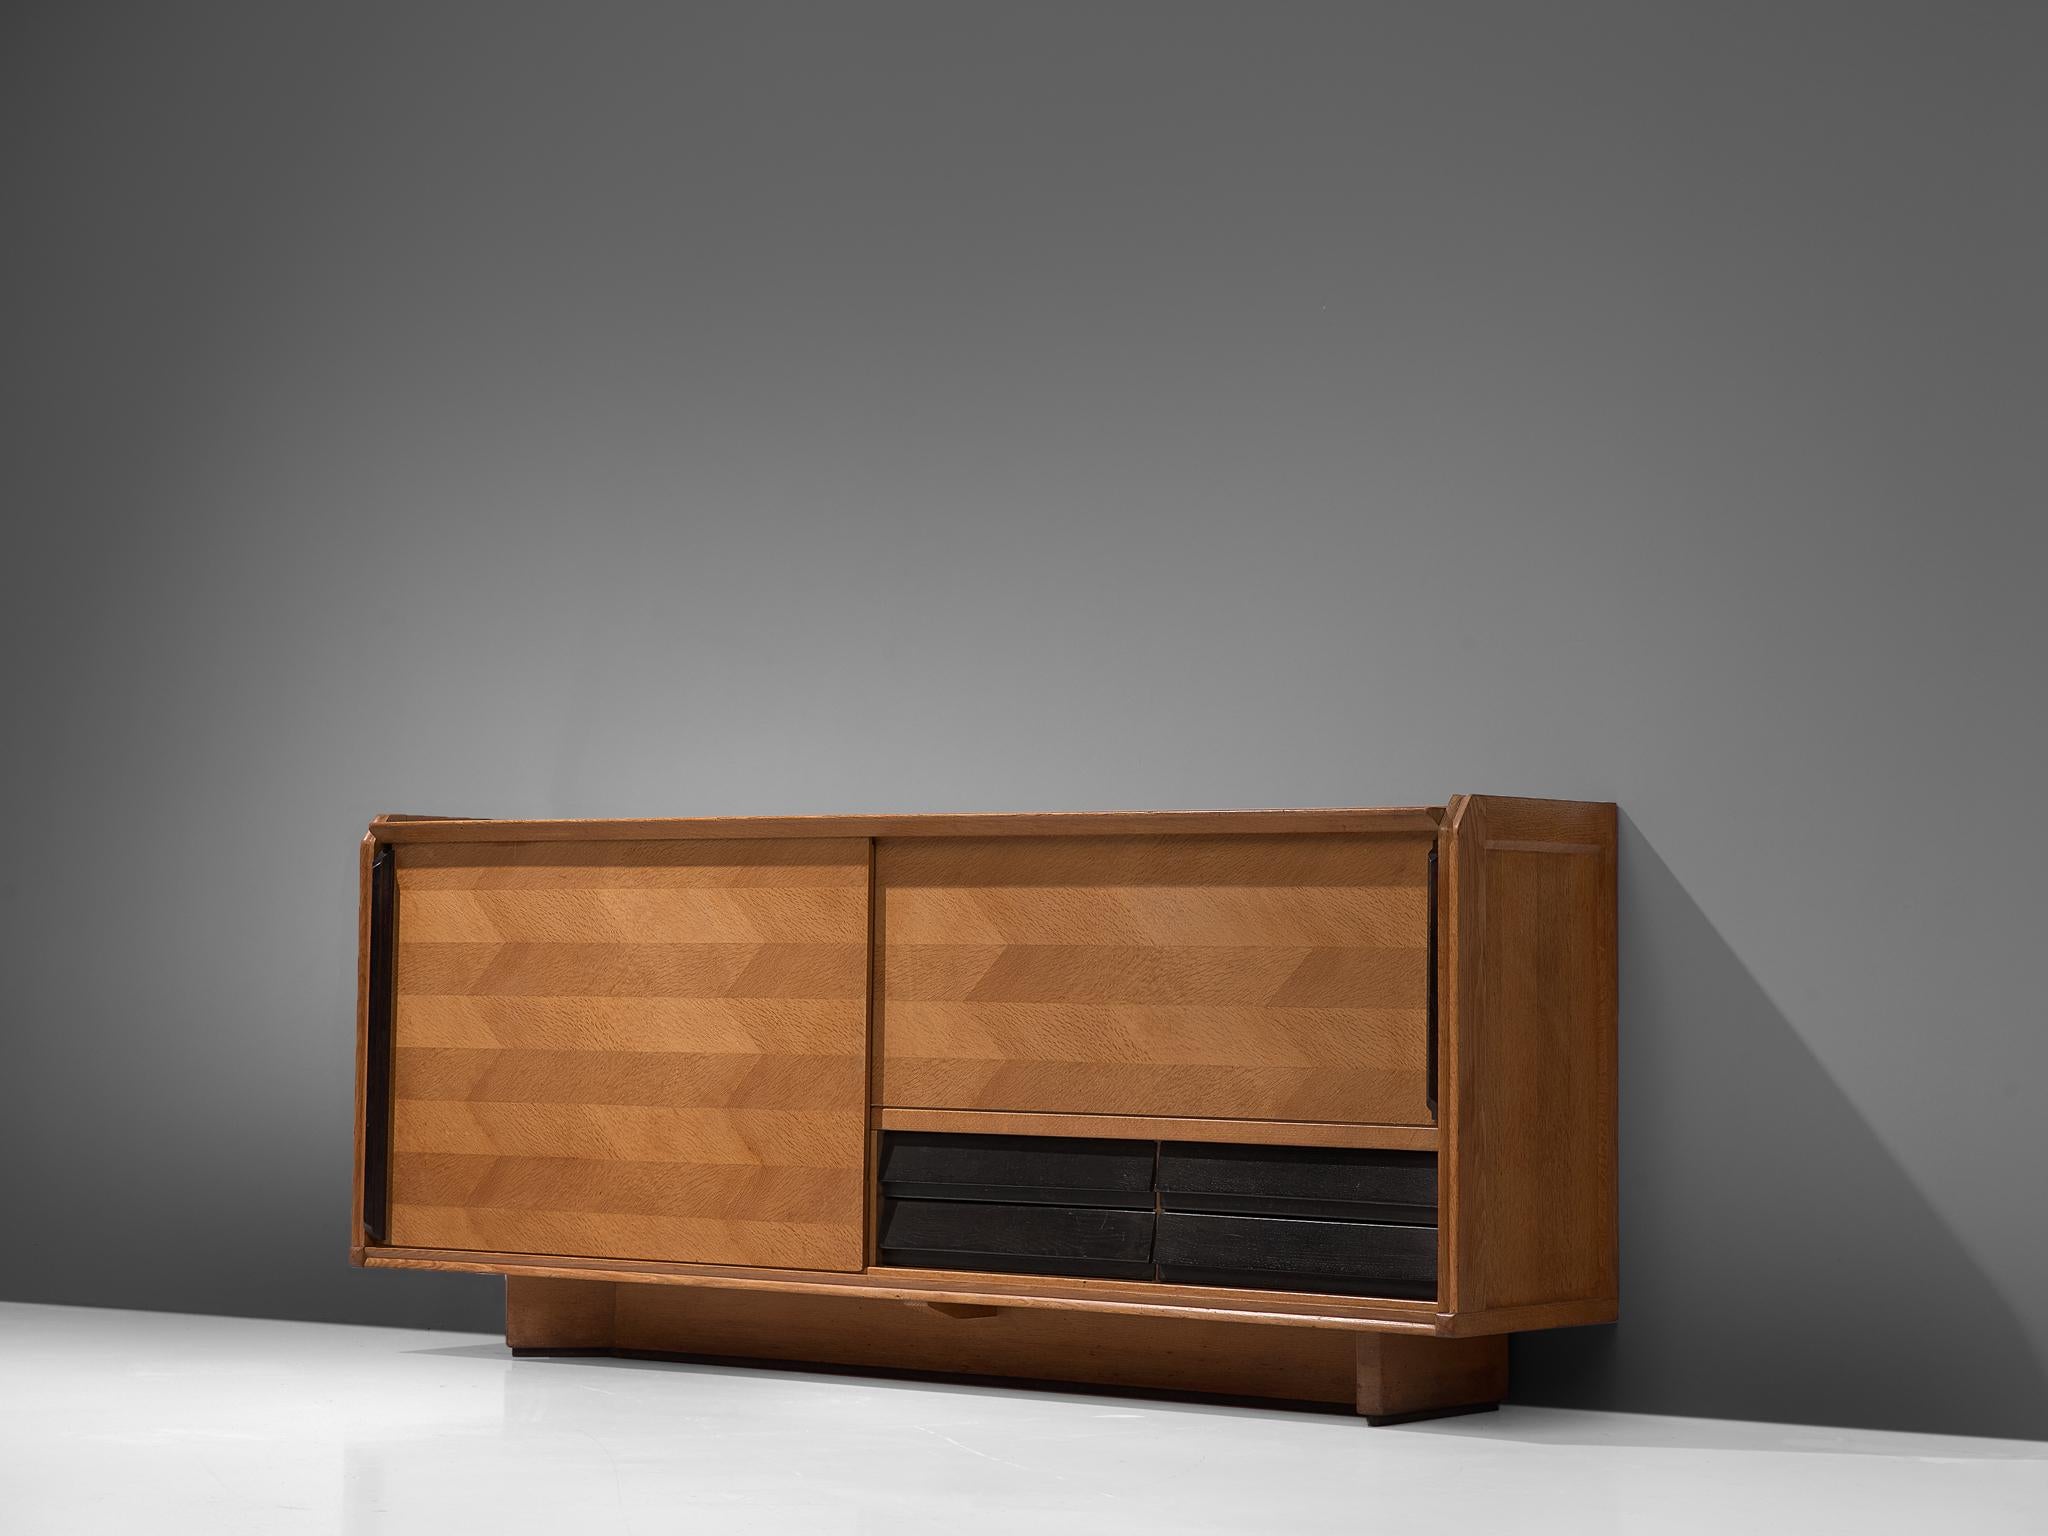 Guillerme et Chambron for Votre Maison, credenza, oak, France, 1960s

Elegant sideboard designed by the French designer duo Guillerme and Chambron. The sideboard is characterized by the horizontal oakwood inlay patterns. The oak doors feature a